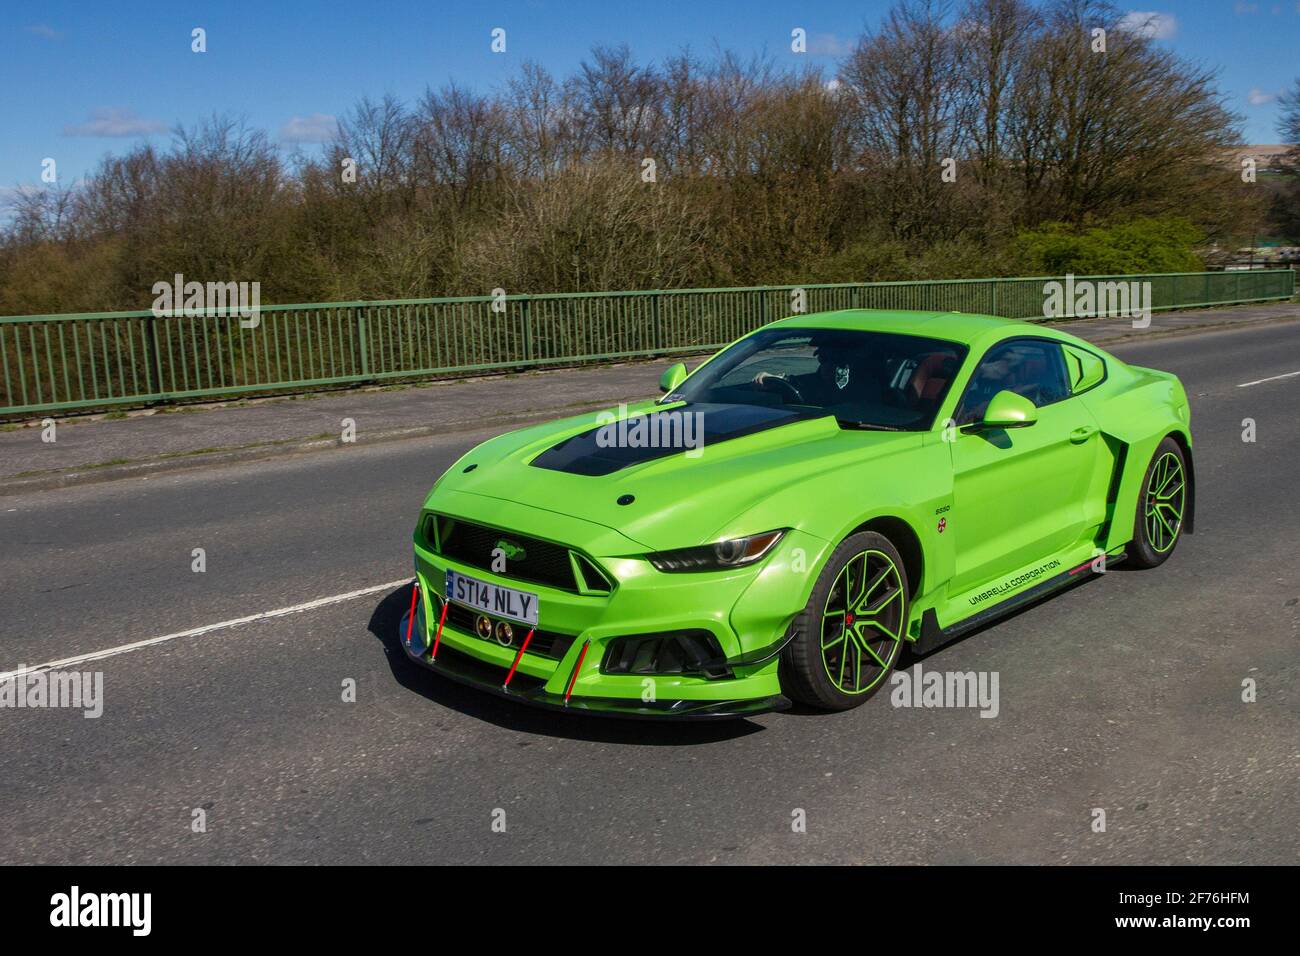 2017 green Ford Mustang GT 5951cc petrol coupe; Vehicular traffic moving vehicles, cars driving vehicle on UK roads, motors, motoring on the M6 motorway highway network. Stock Photo